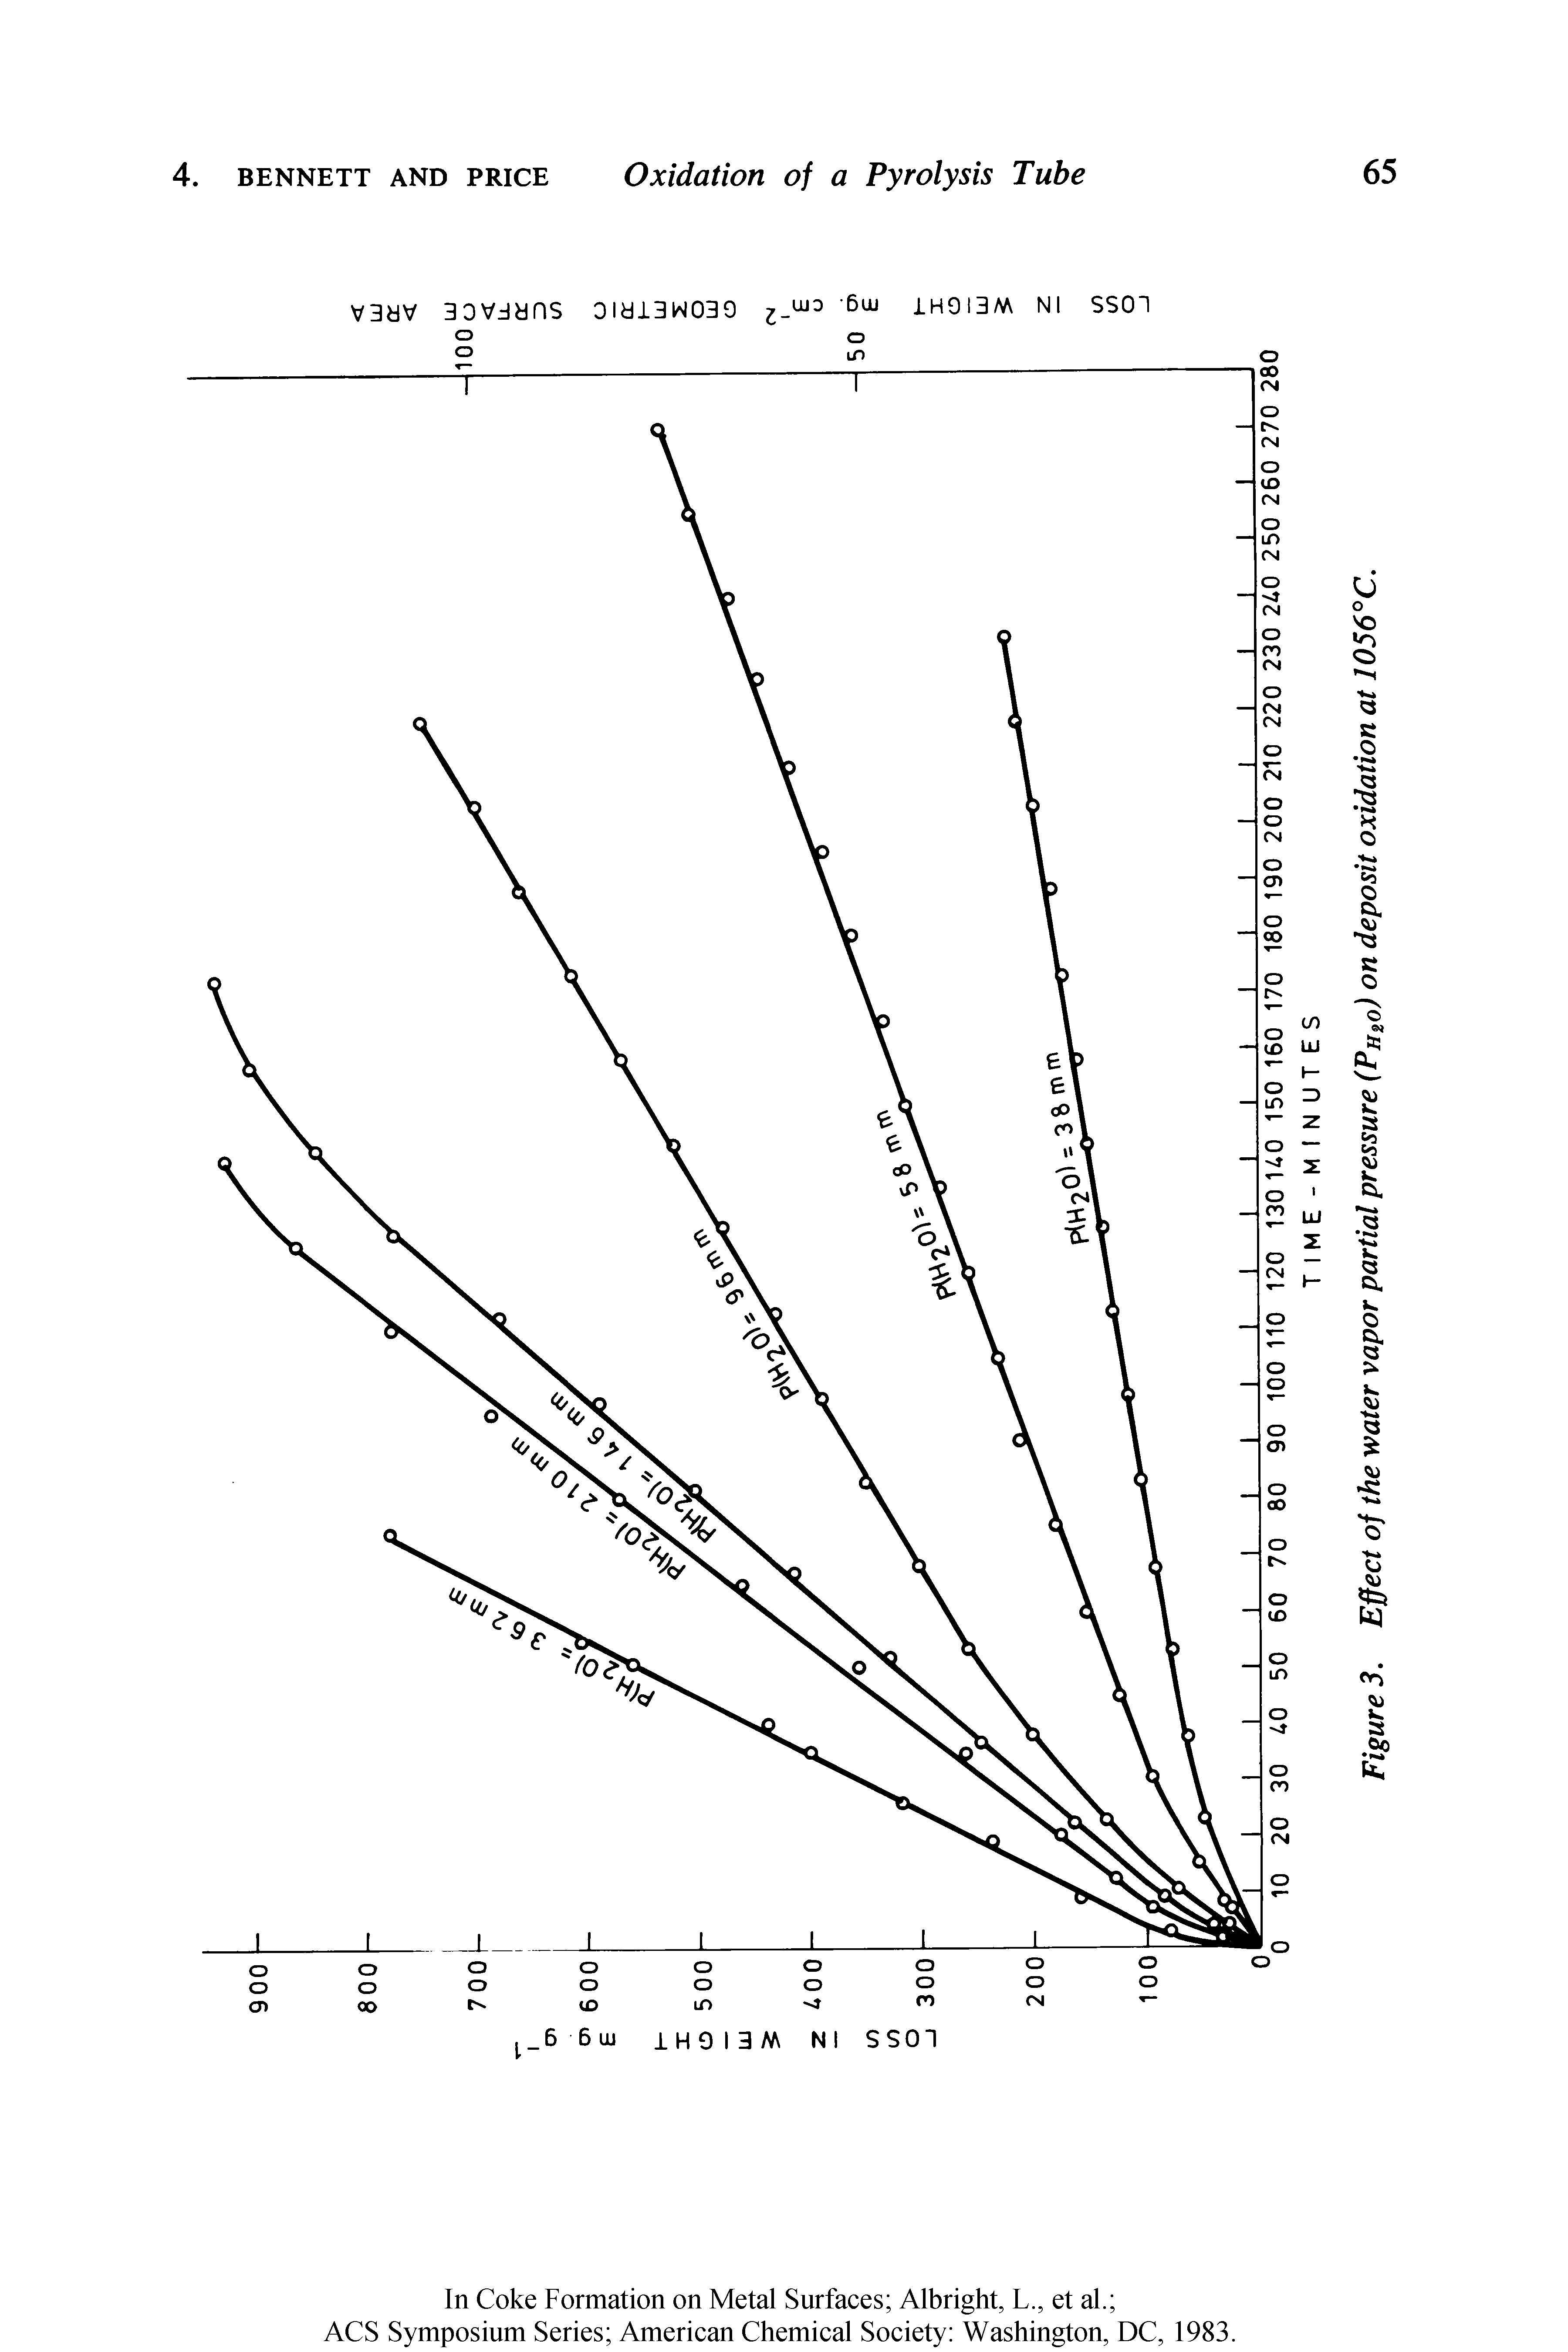 Figure 3. Effect of the water vapor partial pressure (Ph2o) on deposit oxidation at 1056°C.